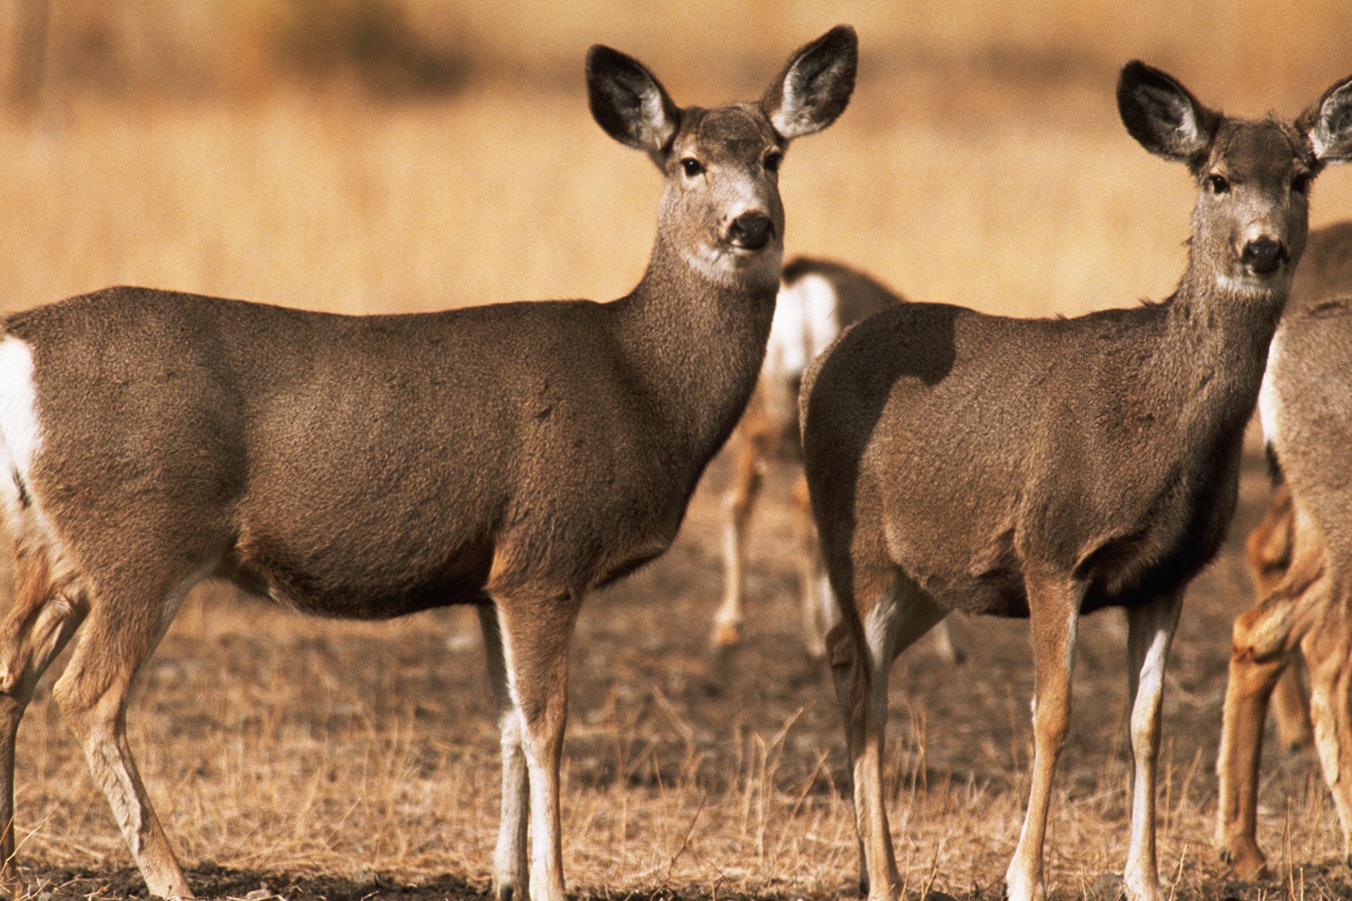 For the first time, chronic wasting disease has been confirmed in wildlife in Yellowstone National Park. The infected animal was a mule deer, like in this file photo of Yellowstone deer.